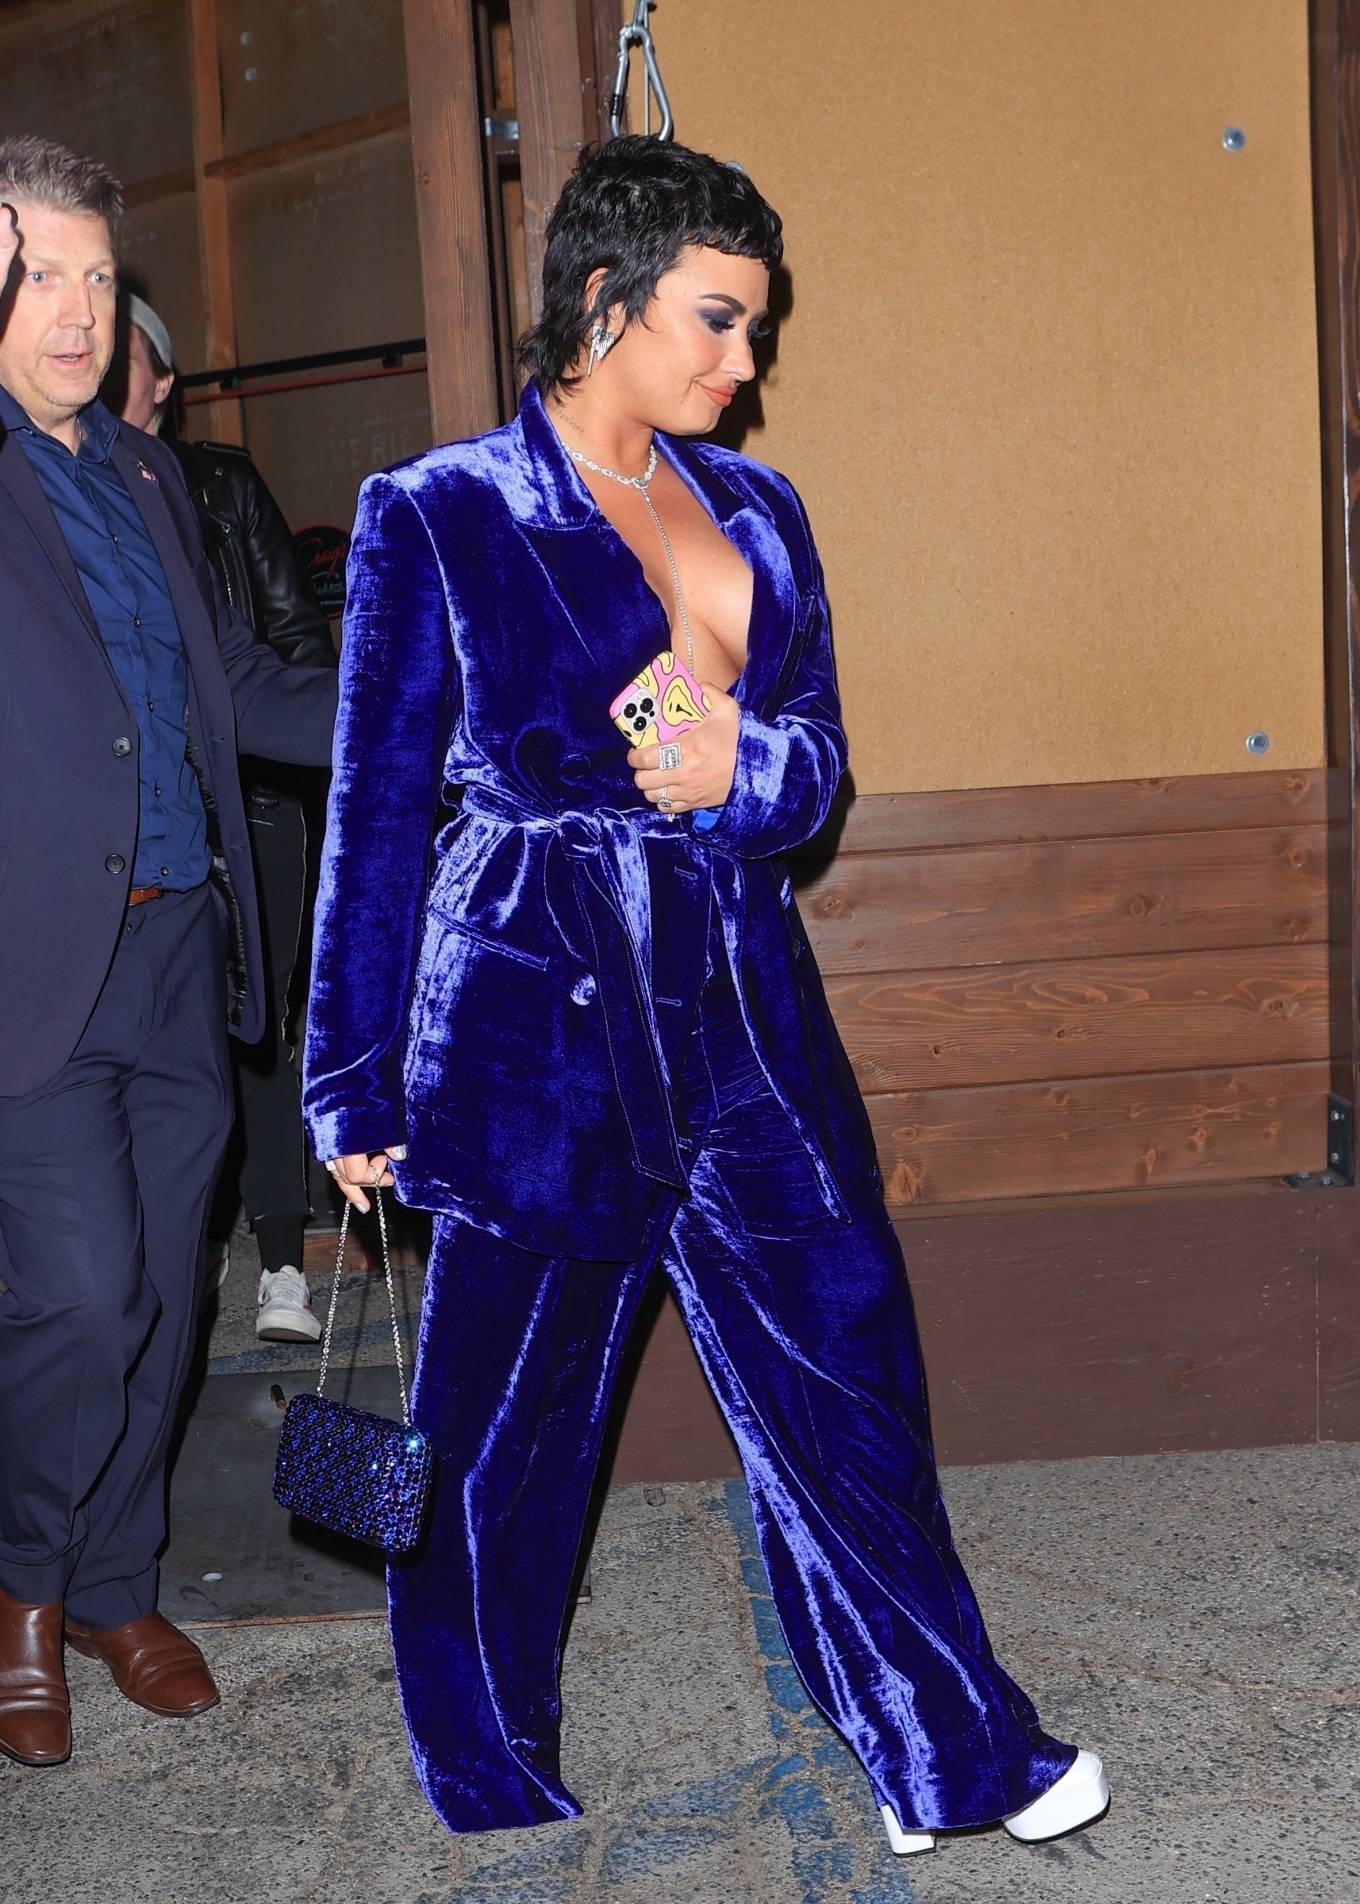 Demi Lovato 2021 : Demi Lovato – Seen in a blue dress leaving Craig’s in West Hollywood-09